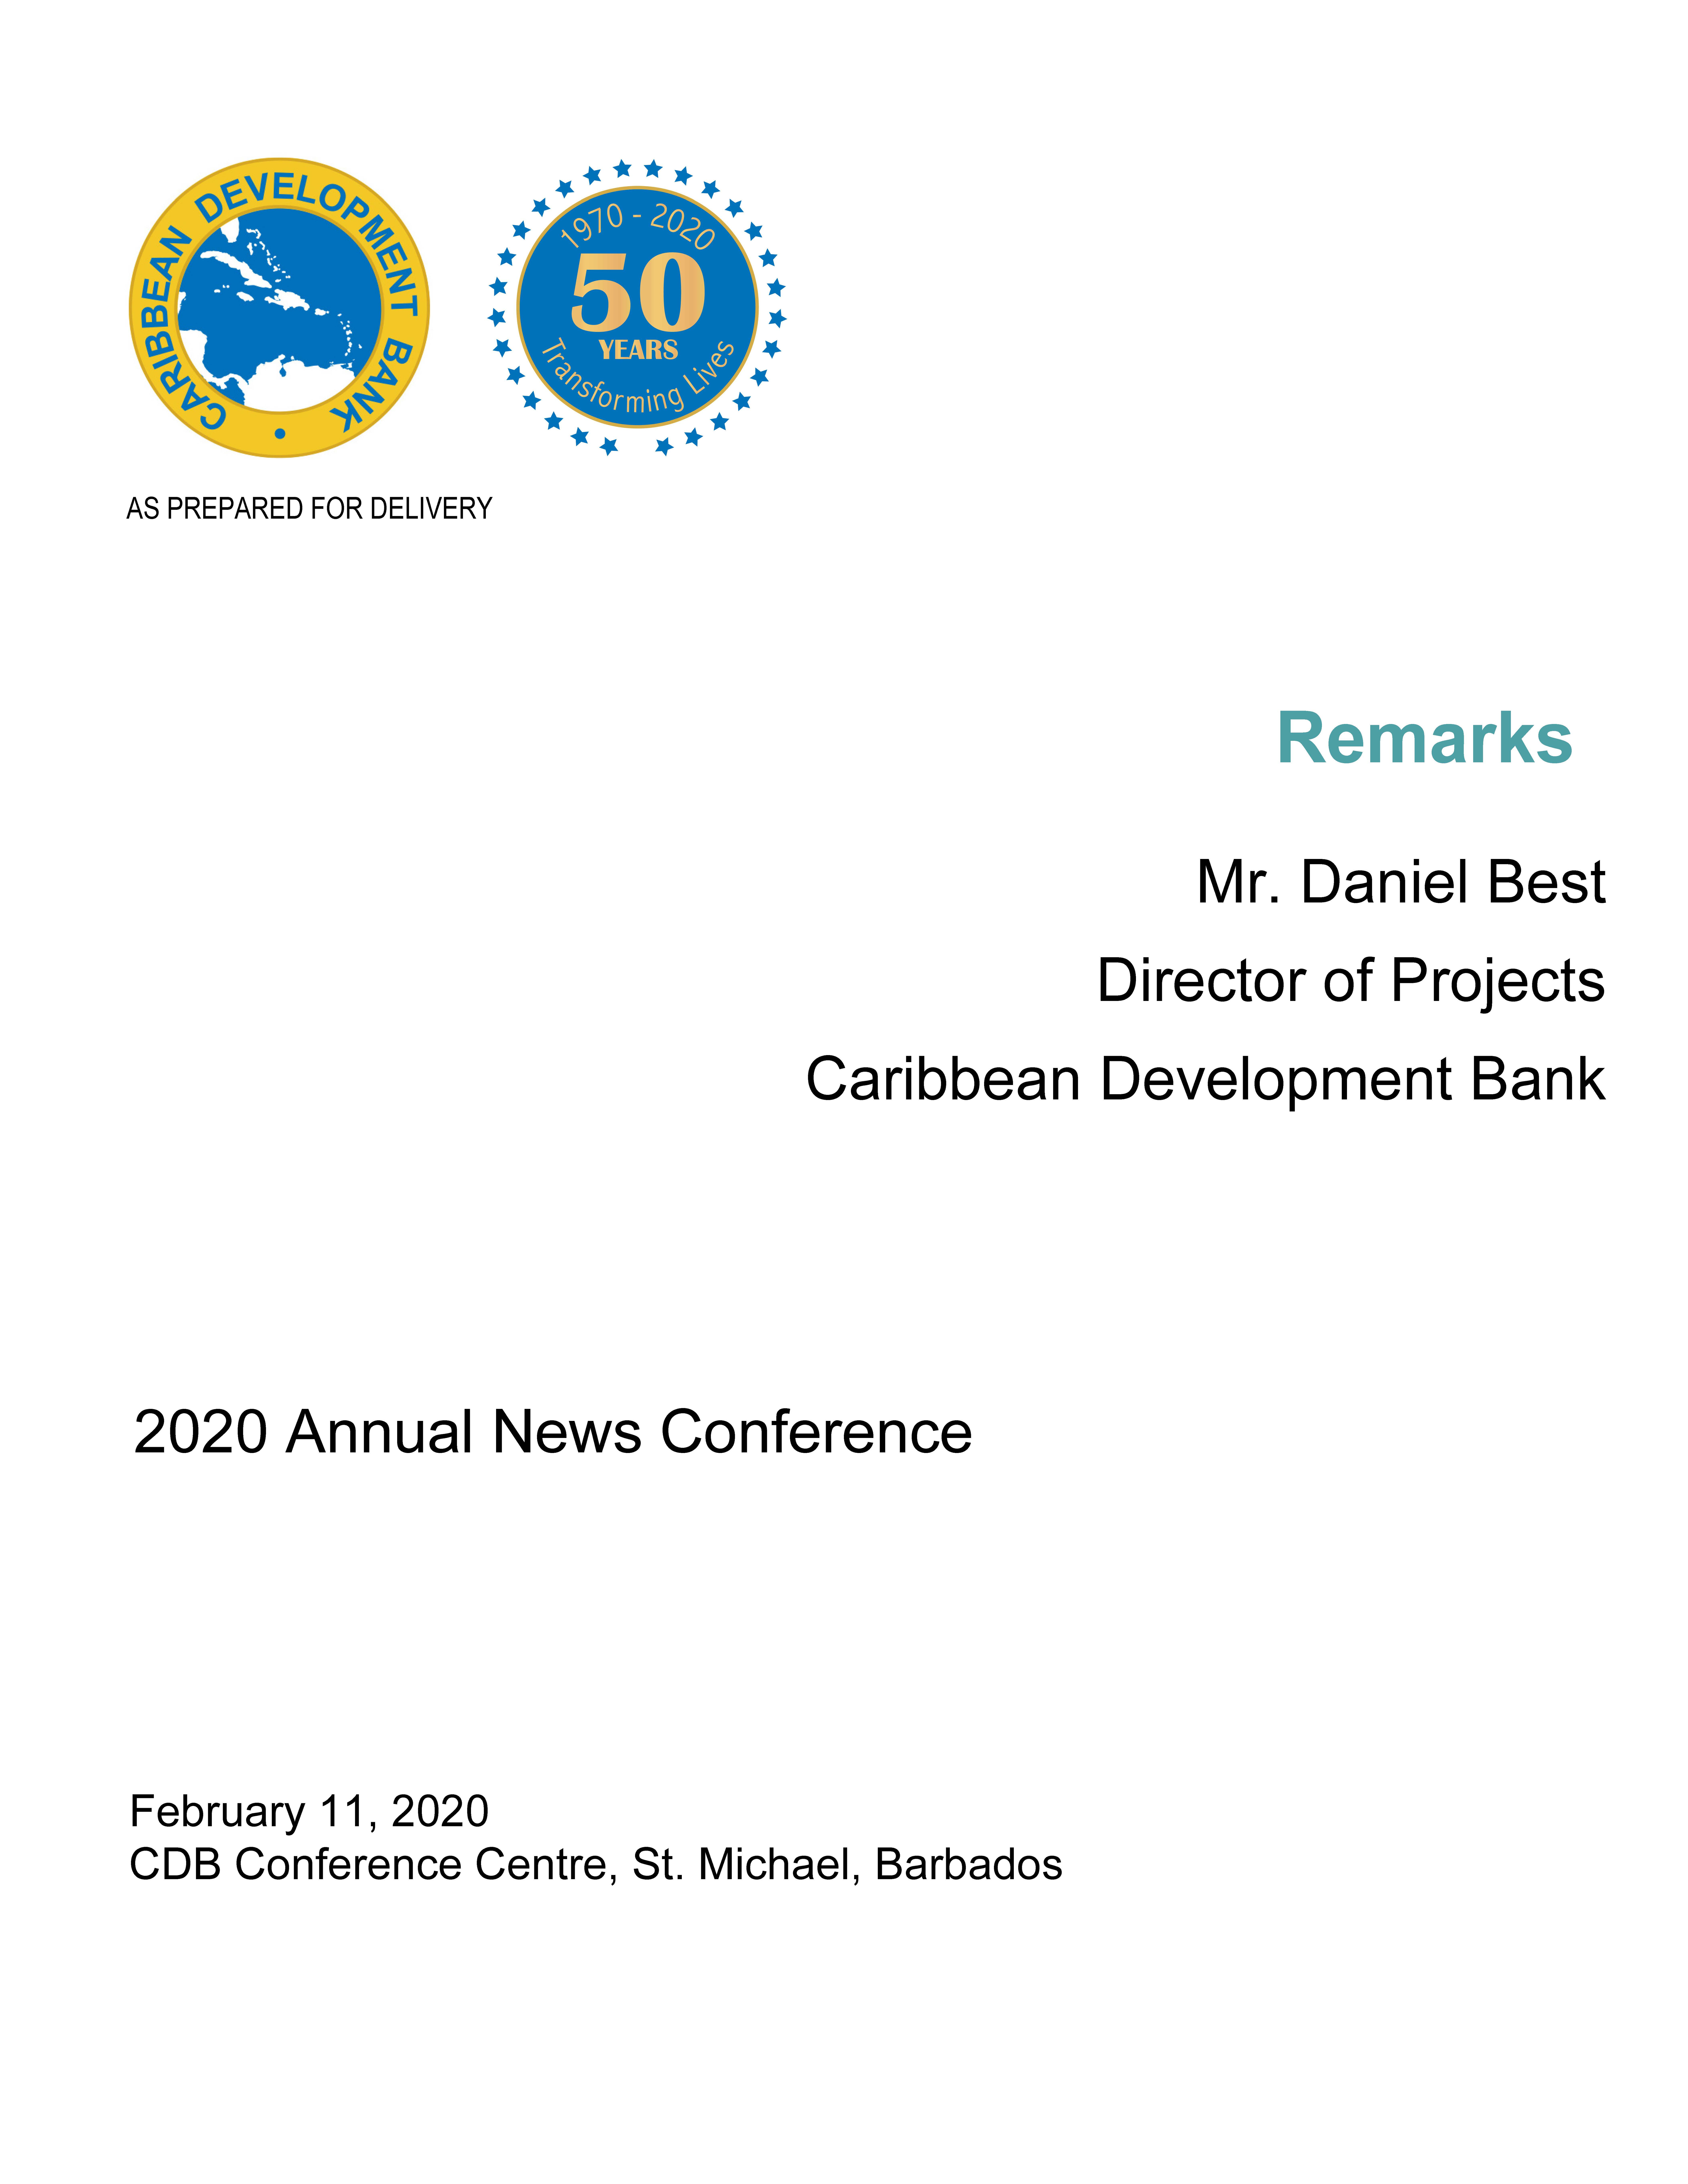 text-based cover for speech delivered by Mr. Daniel Best